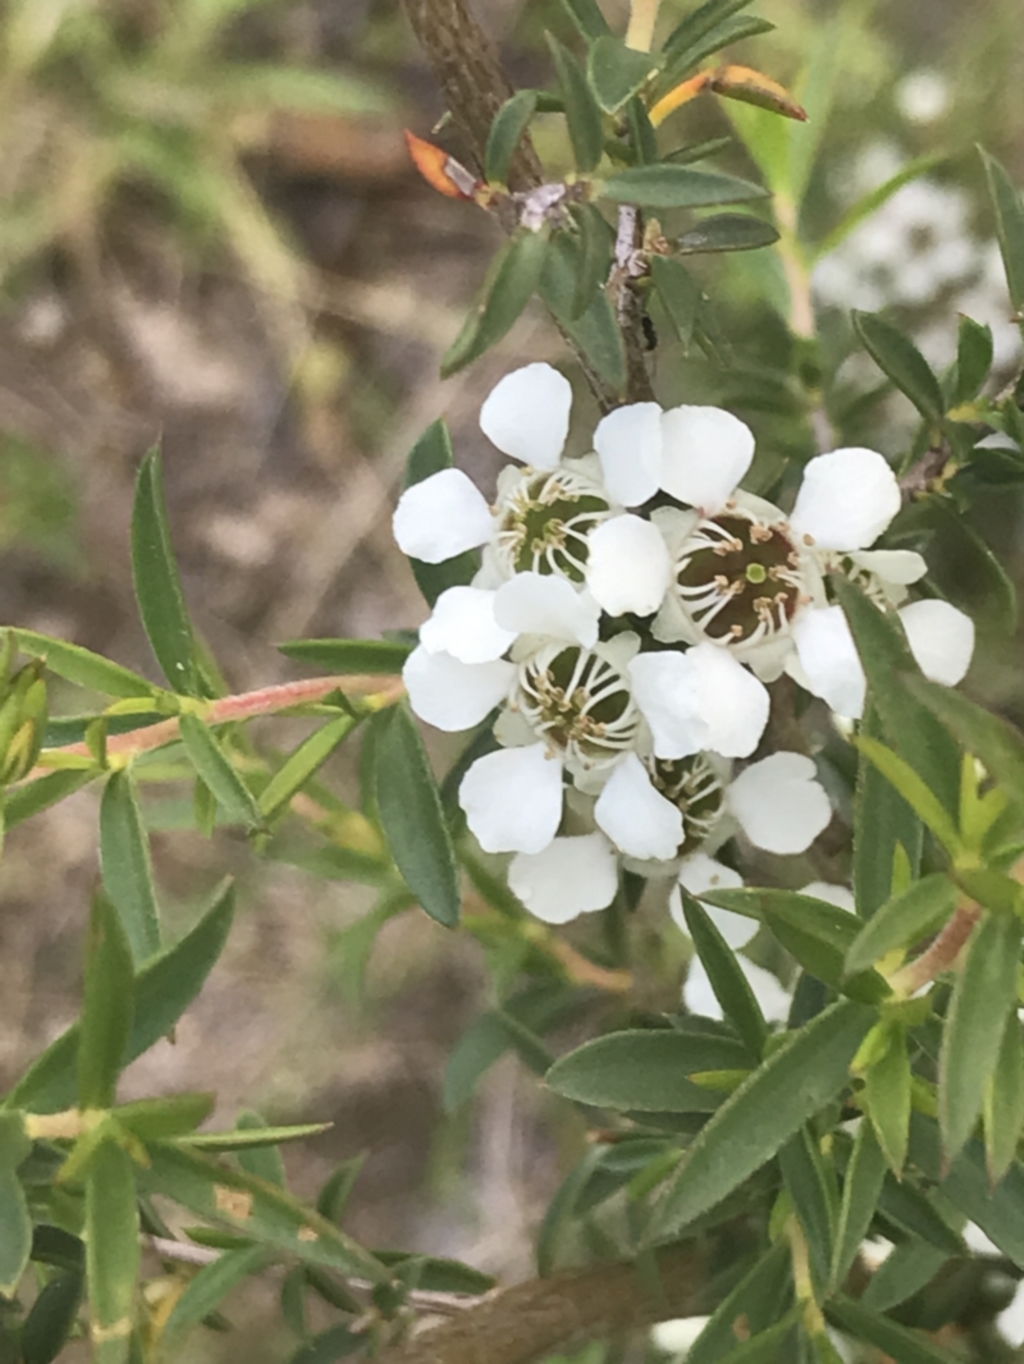 Leptospermum continentale at Tennent, ACT - 10 Jan 2022